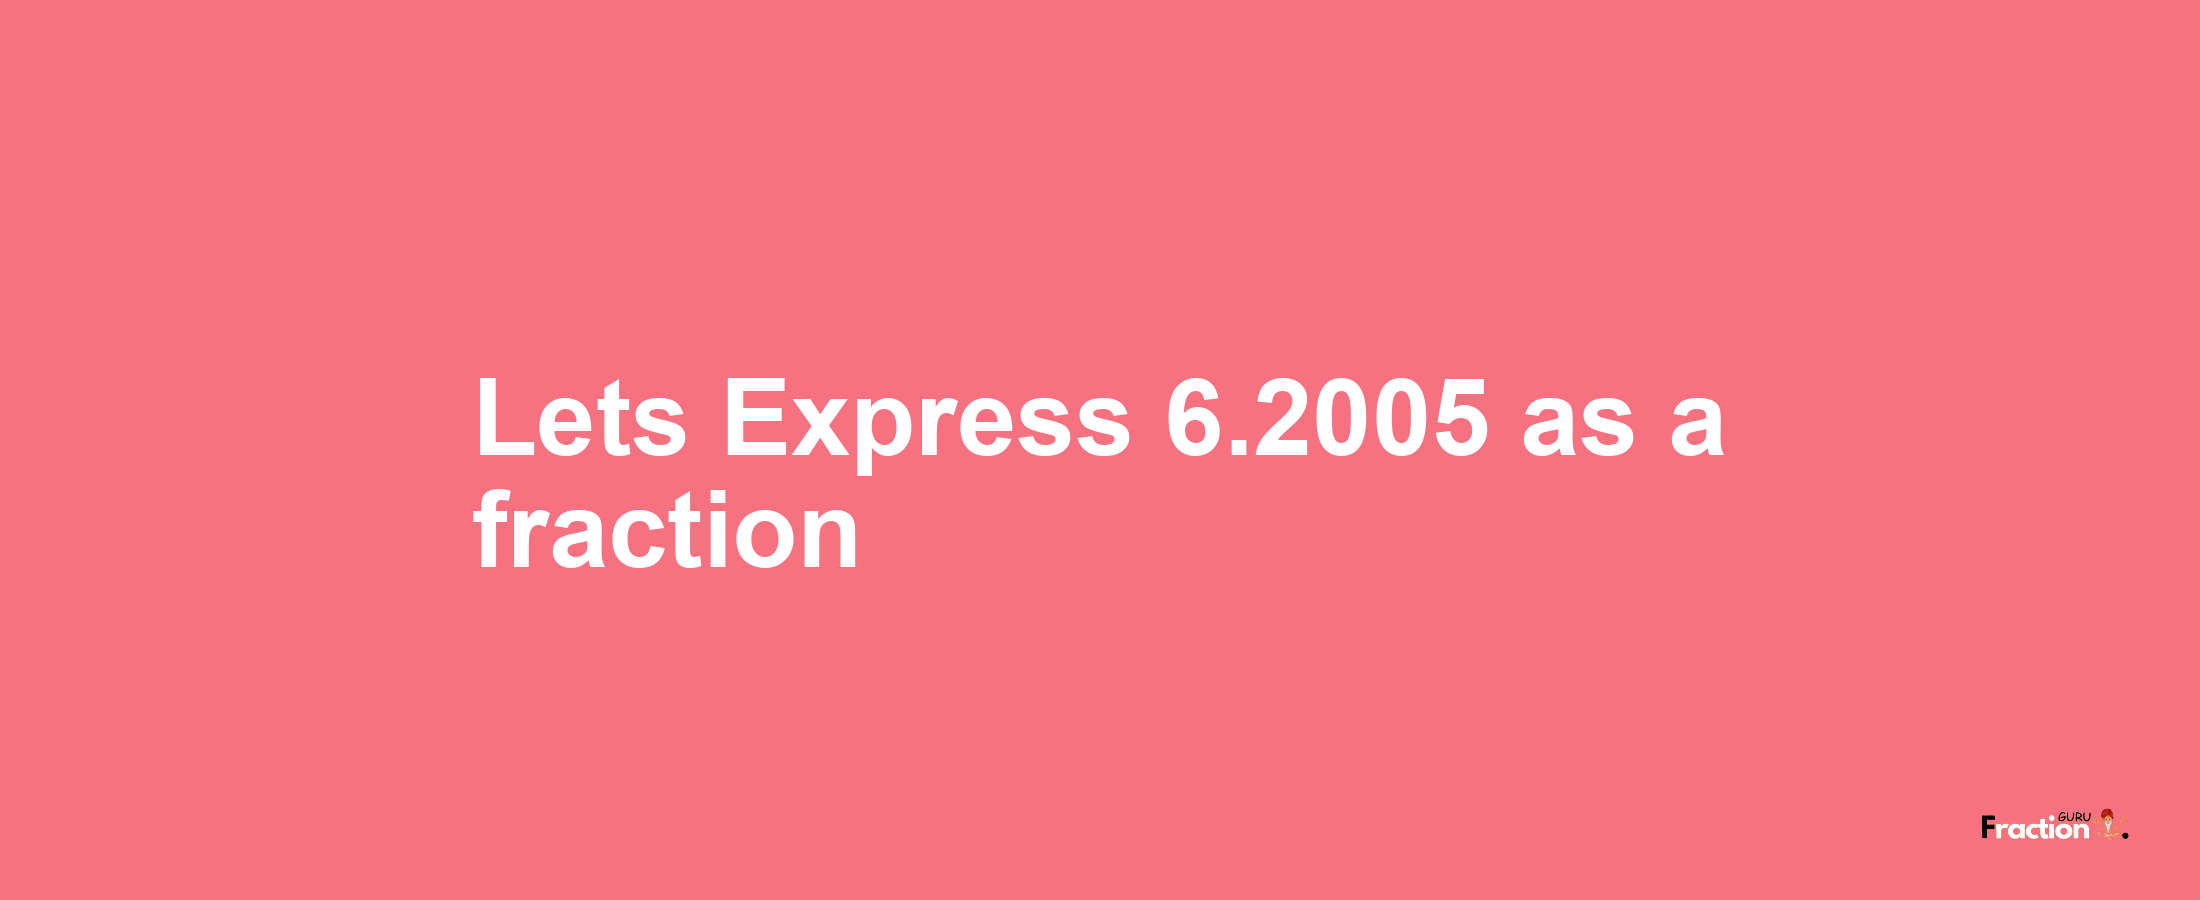 Lets Express 6.2005 as afraction